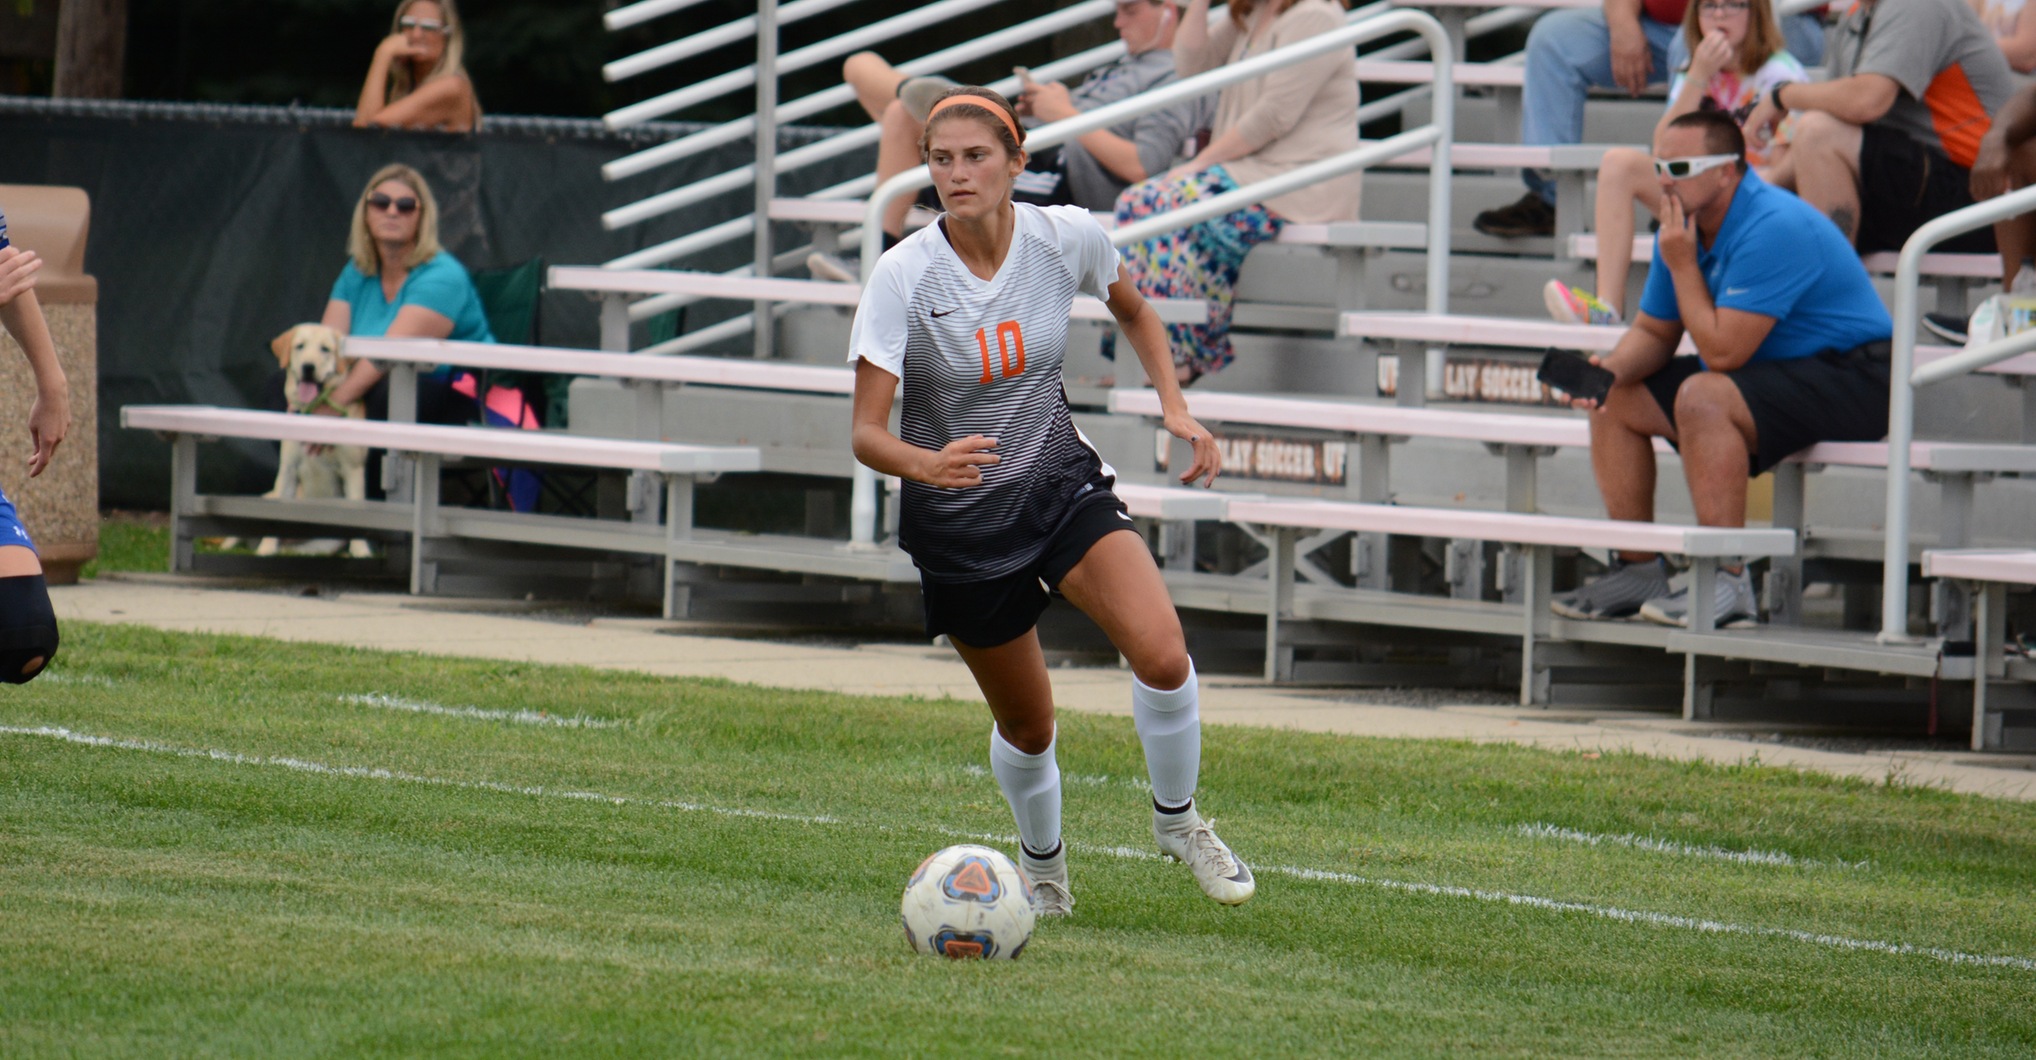 Findlay Remains Unbeaten | Earns Comeback Win at Malone